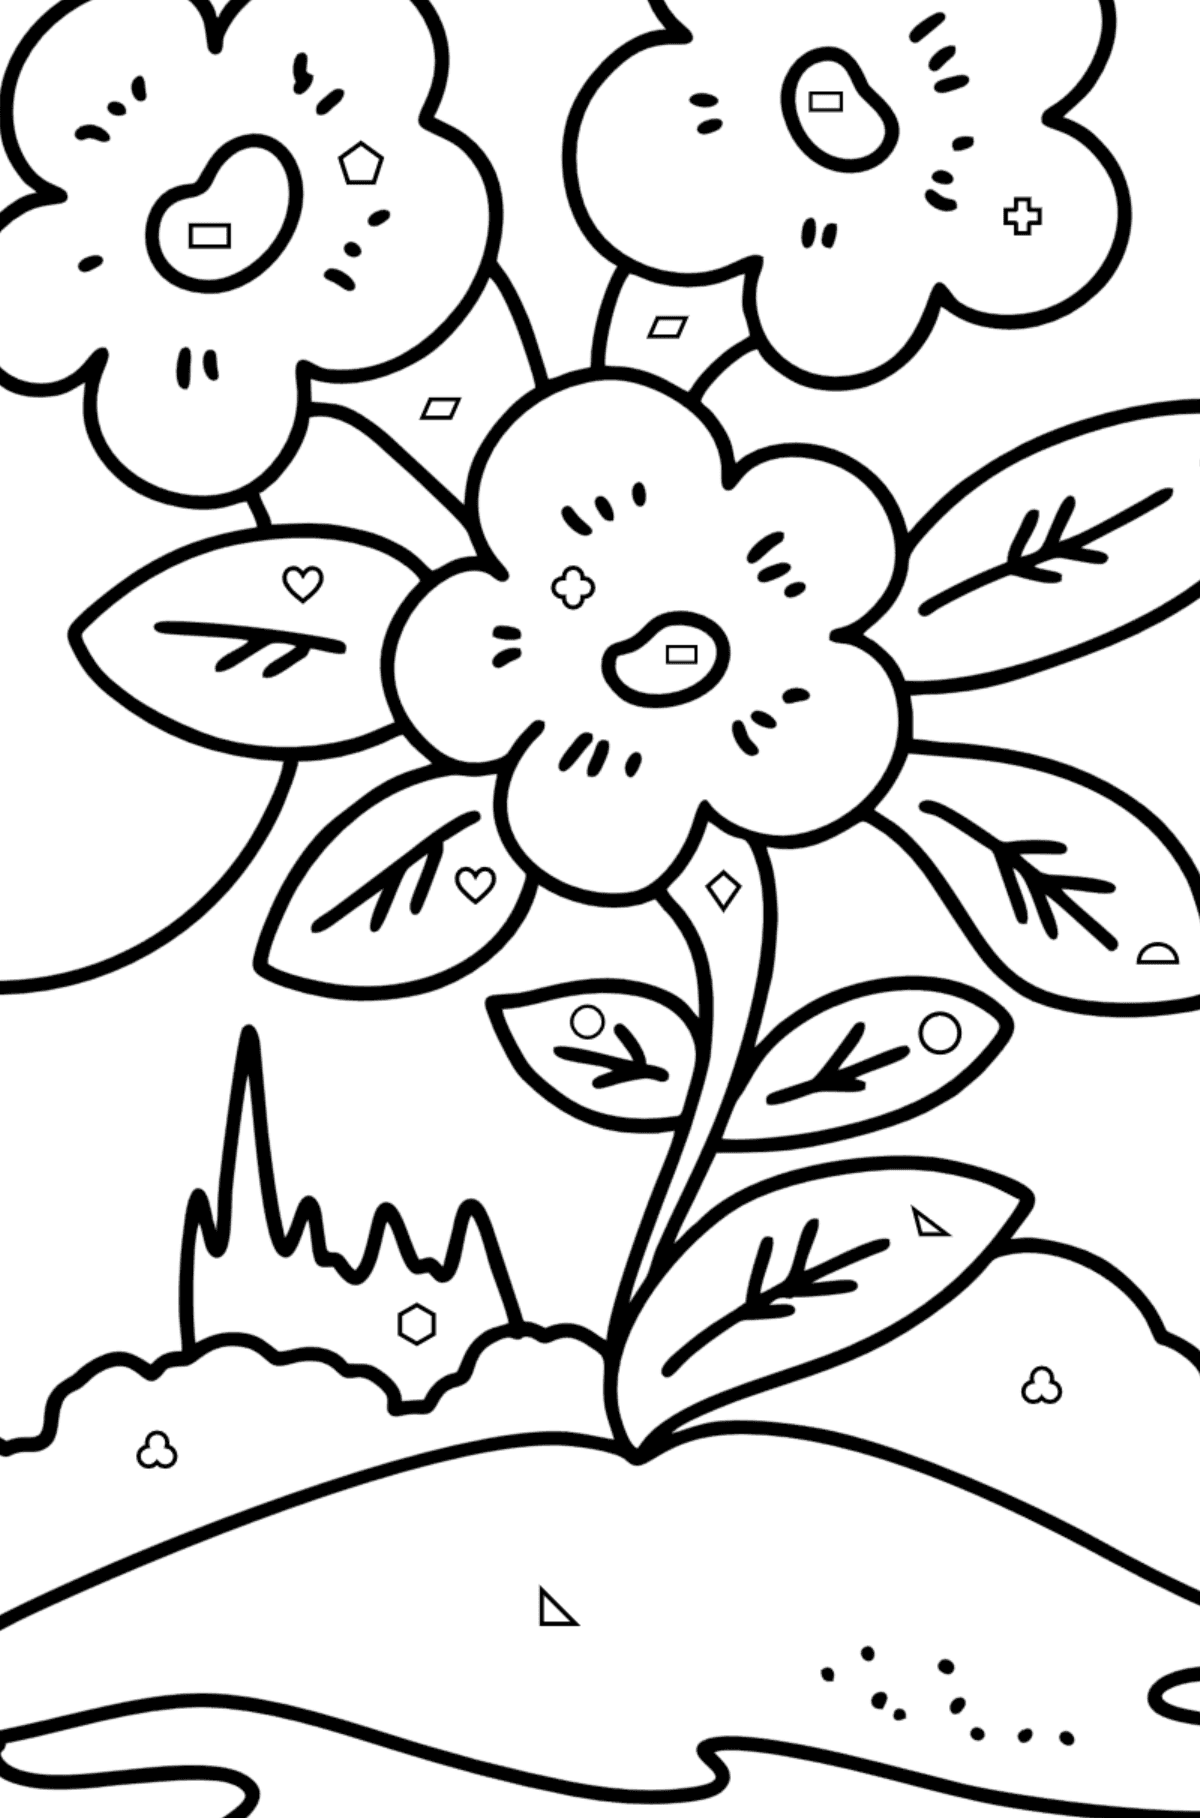 Spring flowers coloring page for Kids - Coloring by Geometric Shapes for Kids